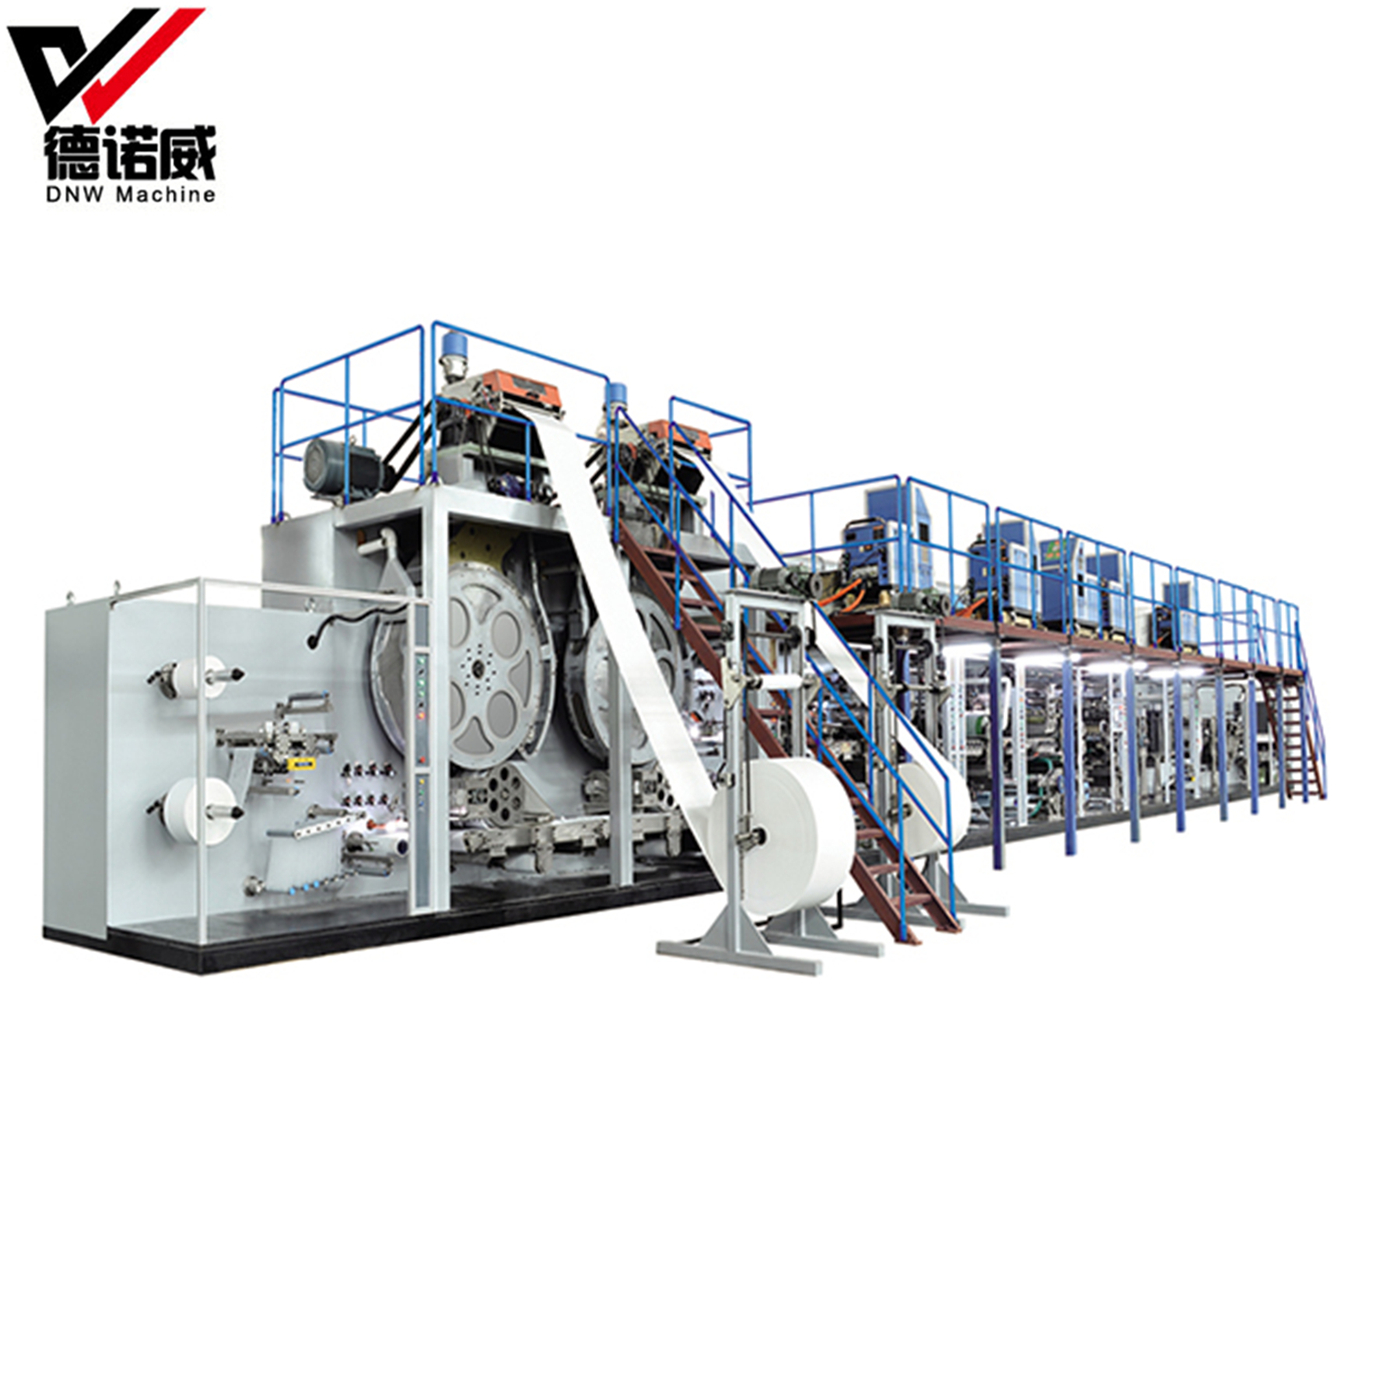 New Technology Large Absorption Reconditioned Unisex Adult Diaper Manufacturing Machine Price 